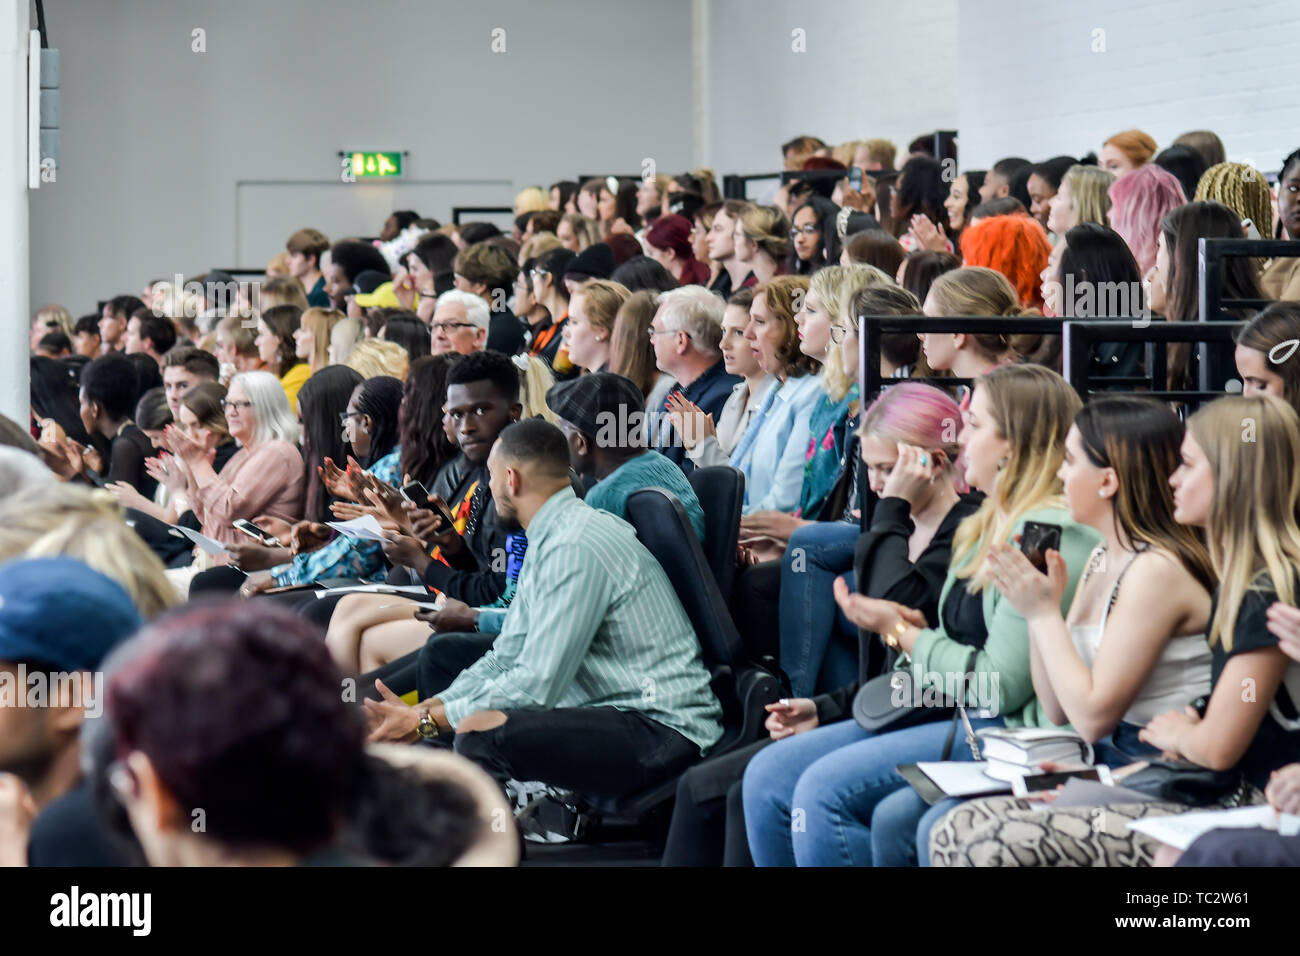 London, UK. 4th June, 2019. UCA Rochester showcases at Graduate Fashion Week 2019 - Day Three, on 2 June 2019, Old Truman Brewery, London, UK. Stock Photo